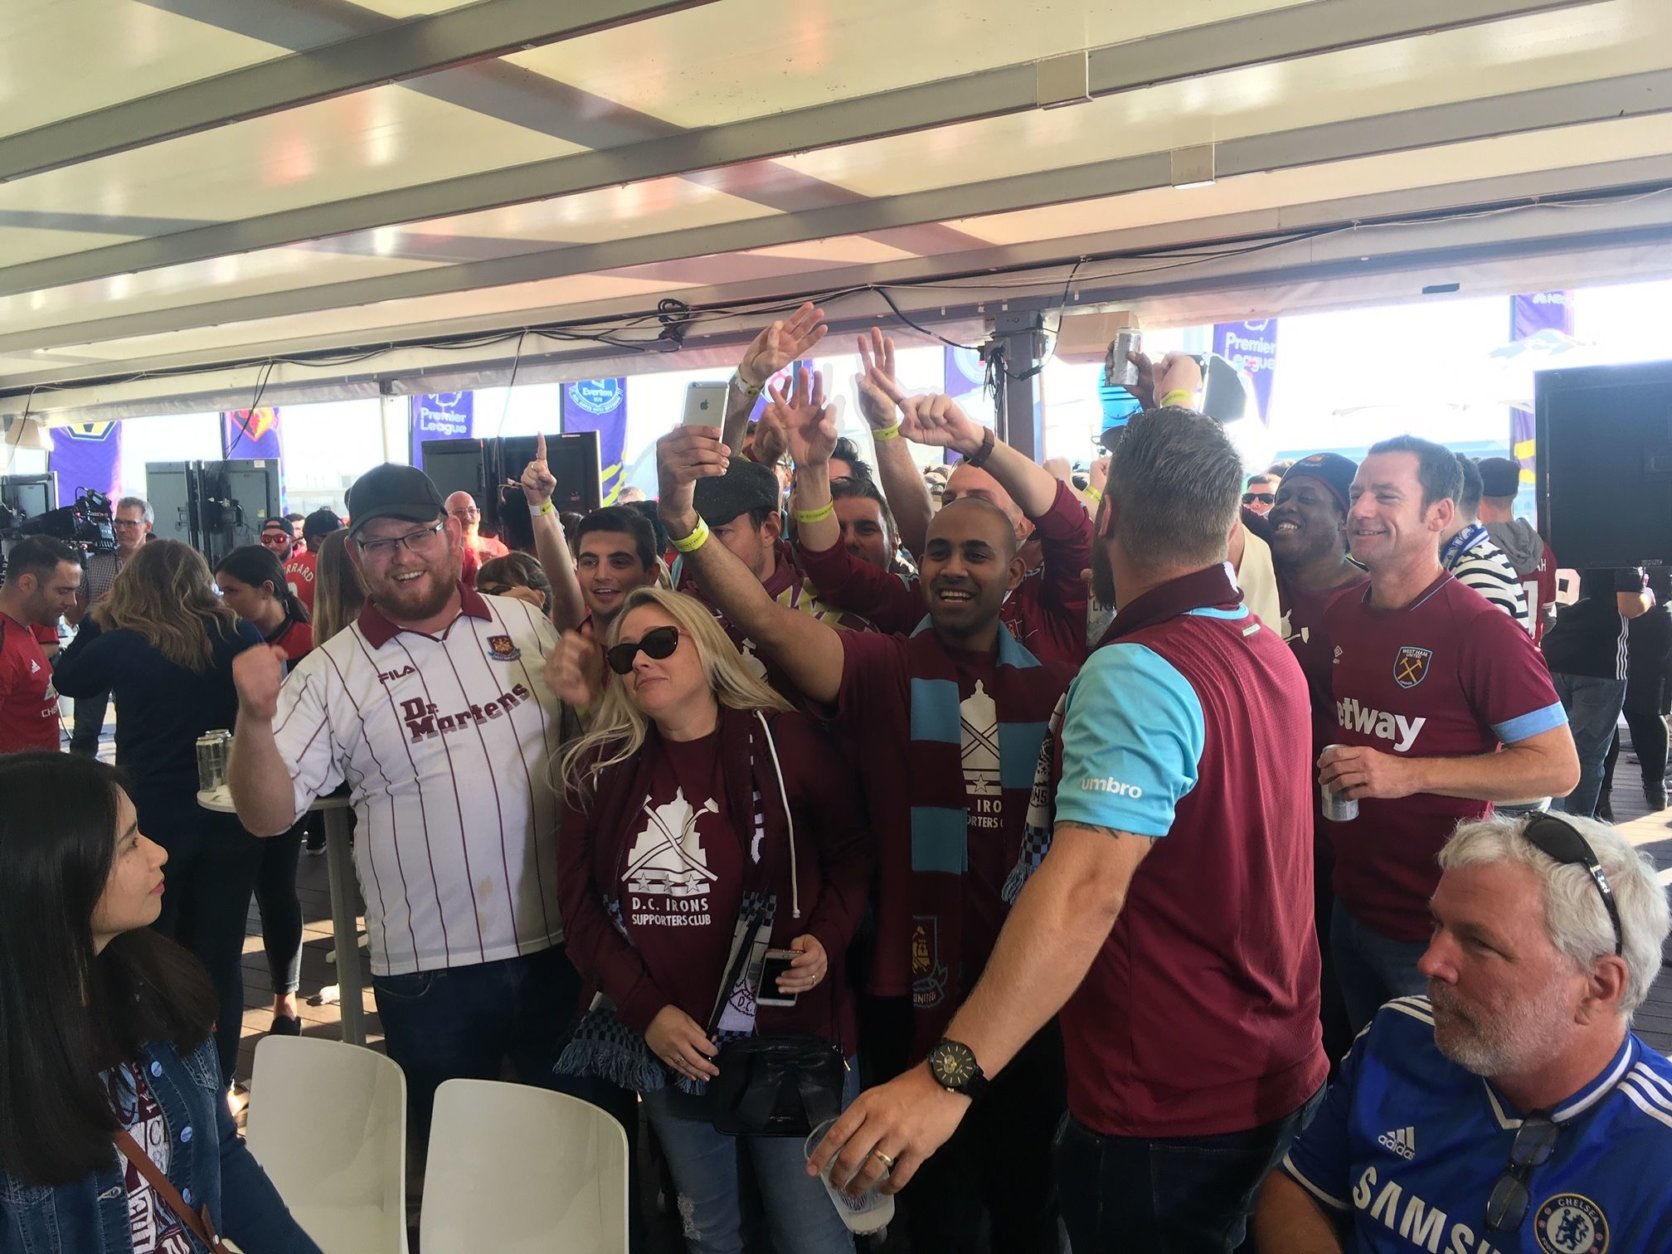 A group of West Ham fans celebrate their upset win over Manchester United at the Premier League Fanfest at Capitol View. (WTOP/Noah Frank)